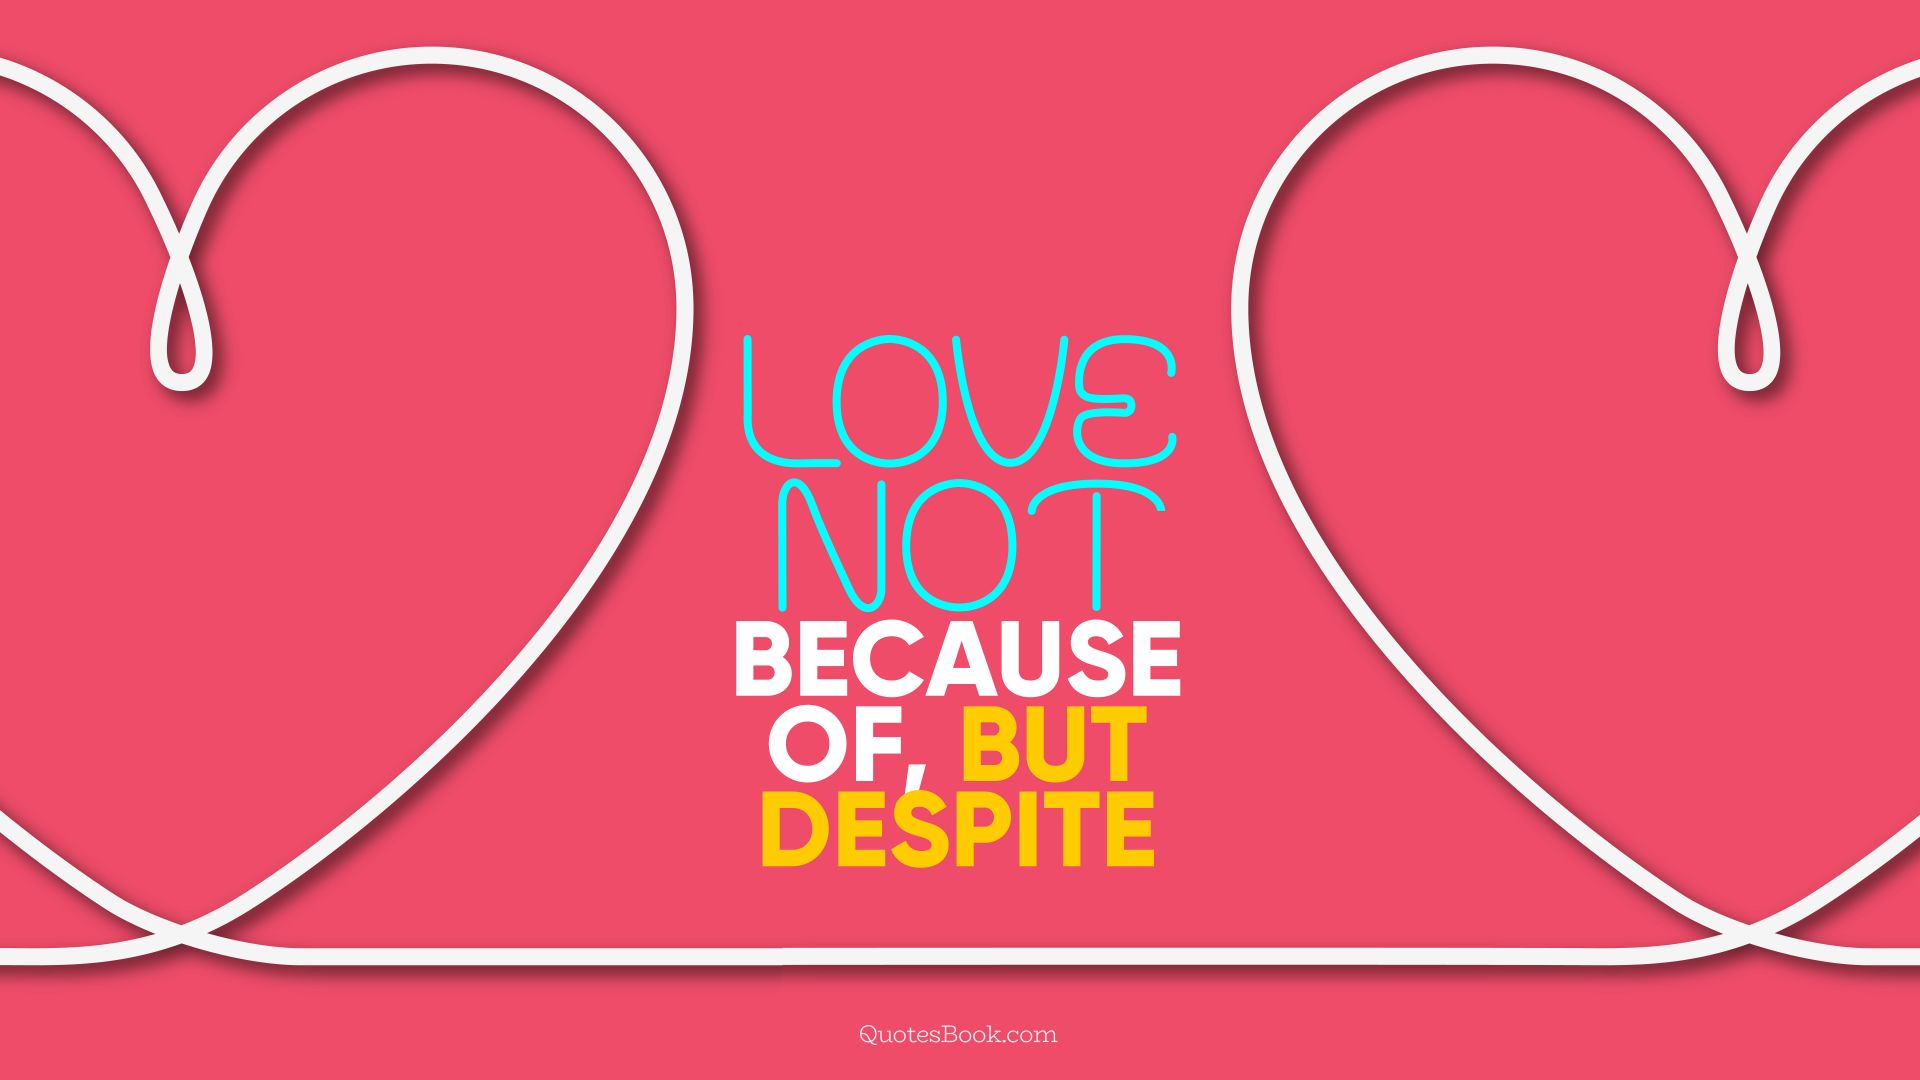 Love not because of, but despite. - Quote by QuotesBook